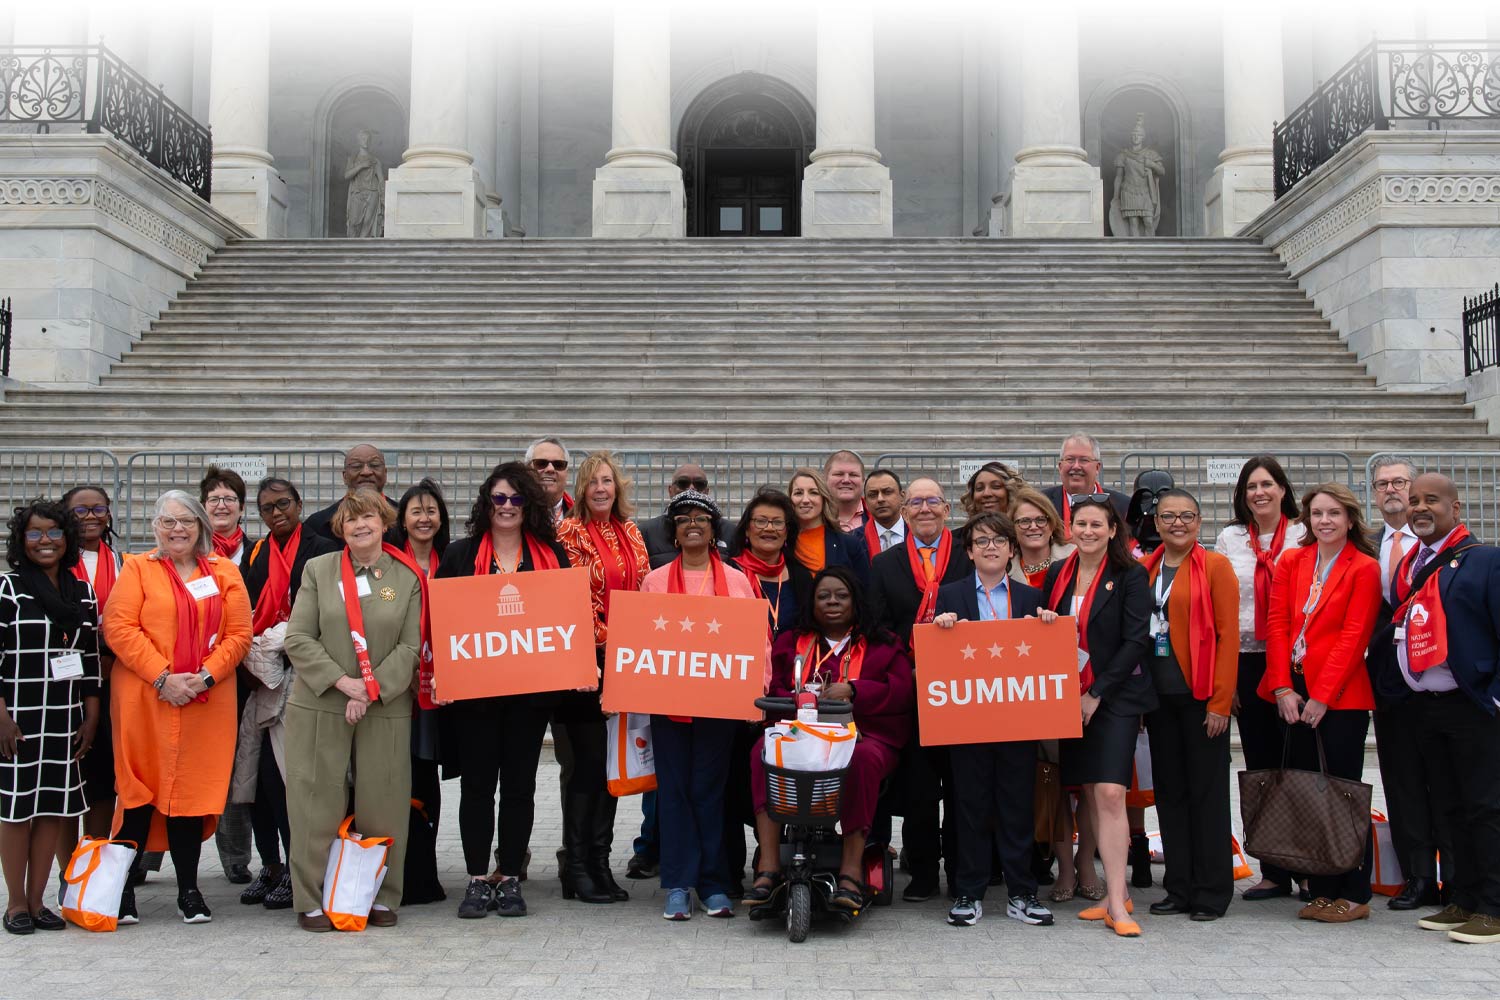 Kidney Patient Summit group posing in front of the US Capitol